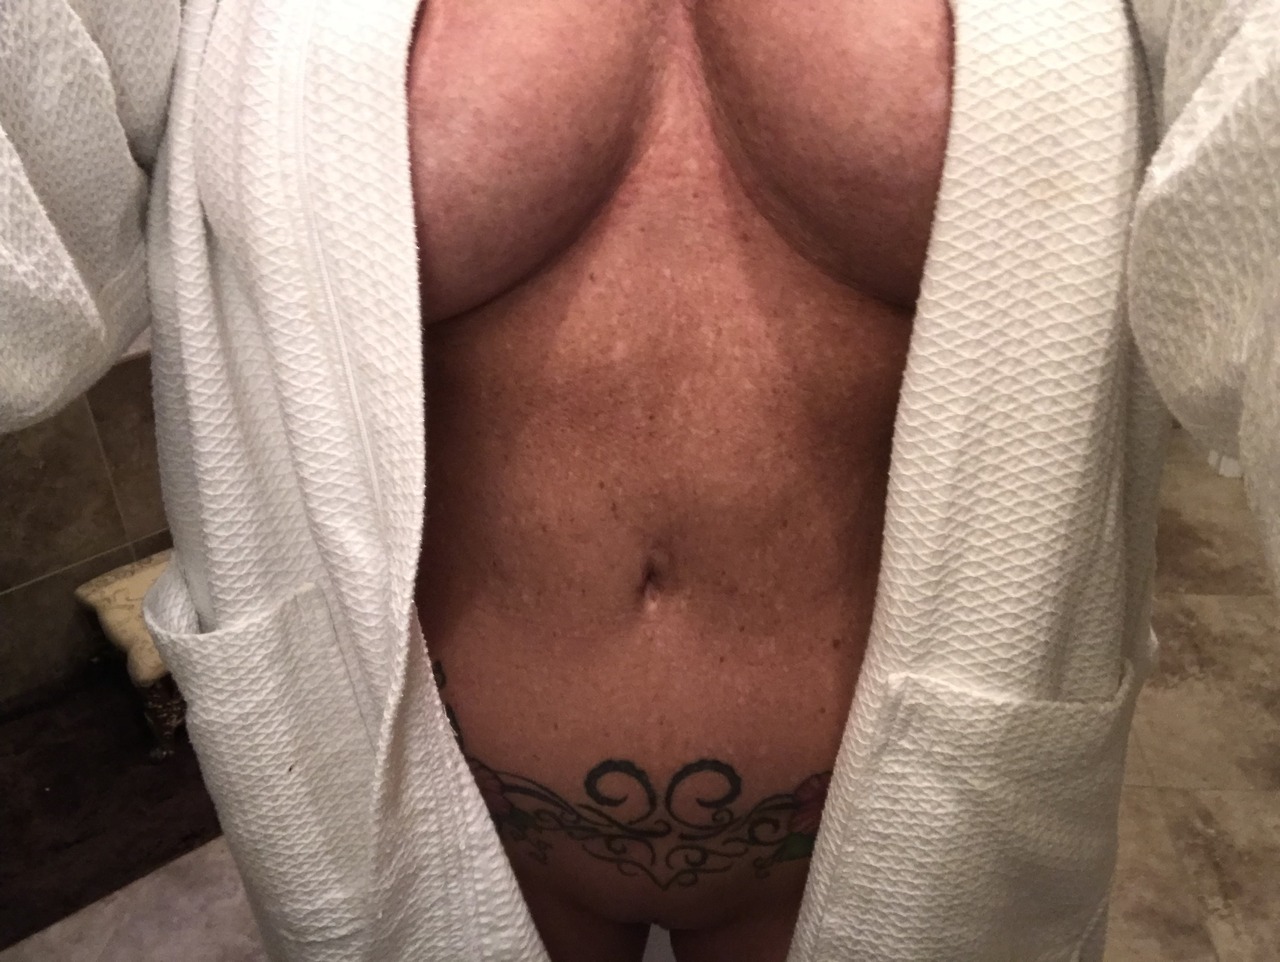 chas-n-naked:  Wifey sent this pic to me while I’m freezing my ass off in a deer